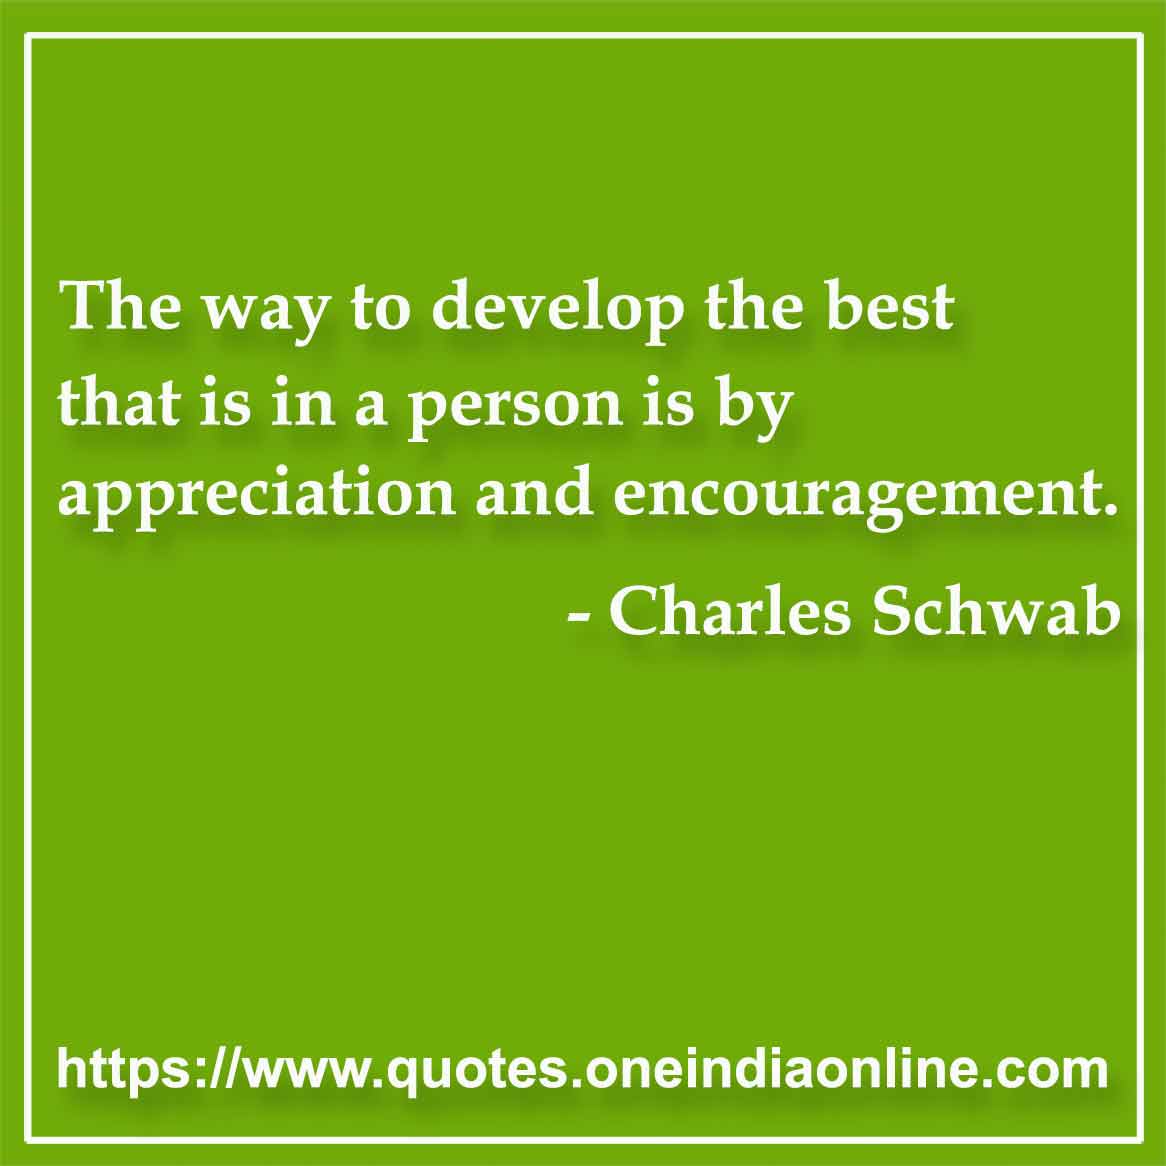 The way to develop the best that is in a person is by appreciation and encouragement. 

-  Charles Schwab